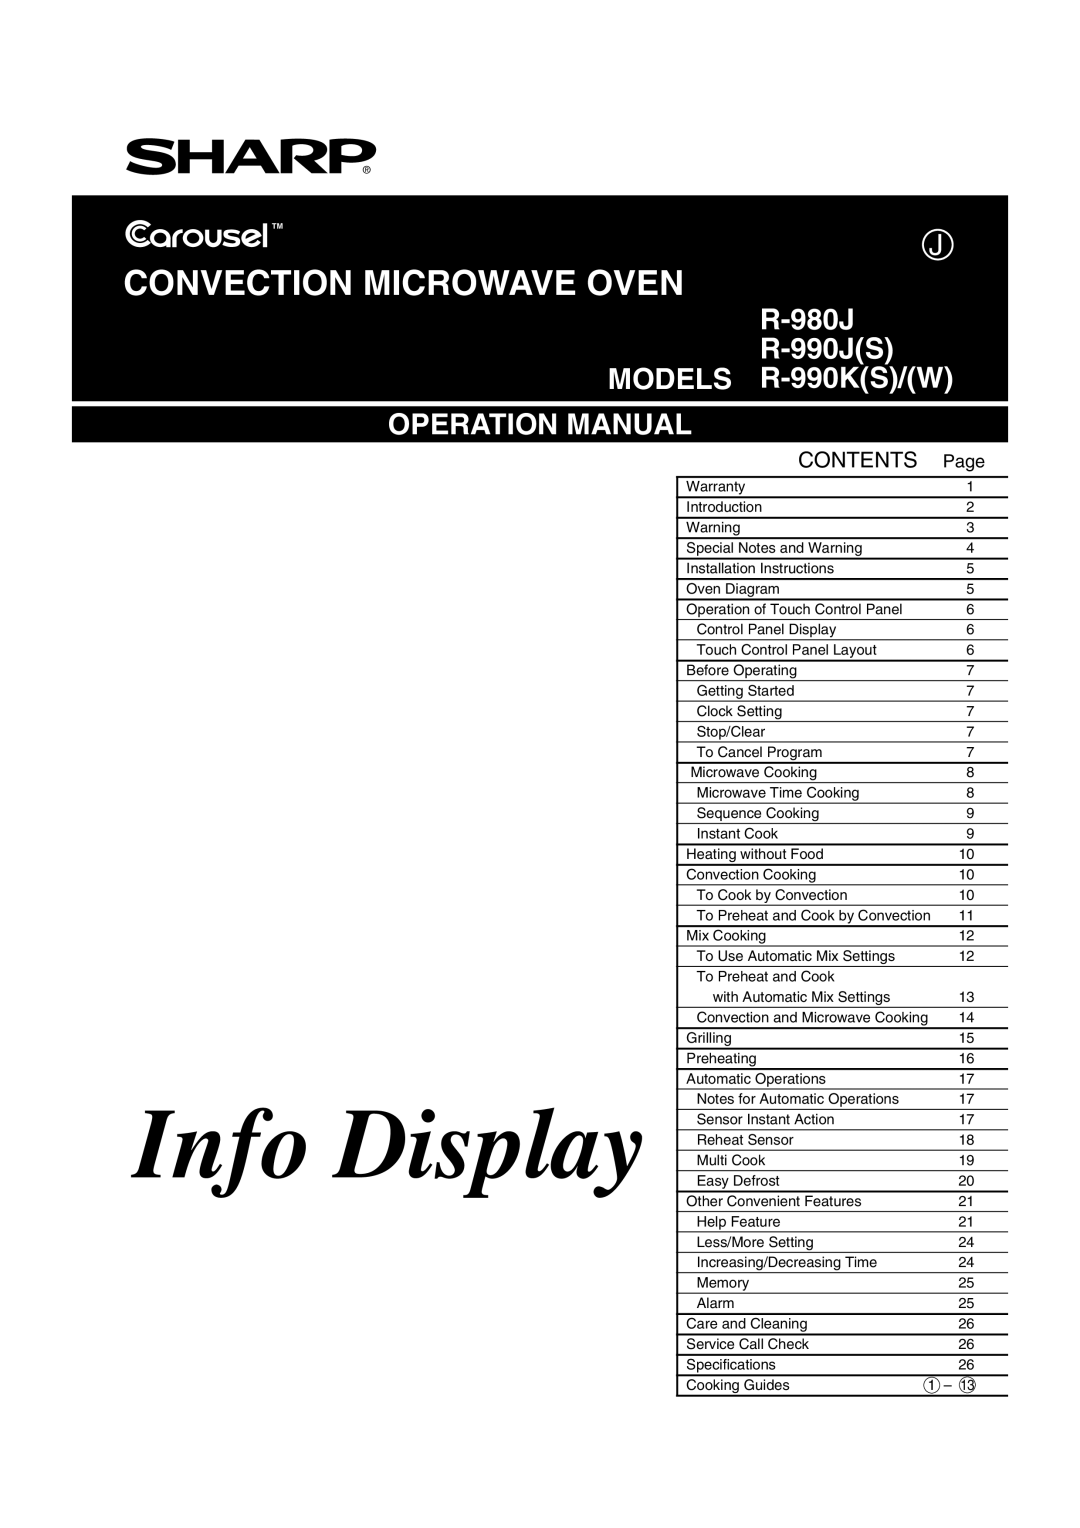 Sharp R-990J(S), R-990K(S)/(W), R-980J operation manual Page, Info Display, Convection Microwave Oven, Contents 